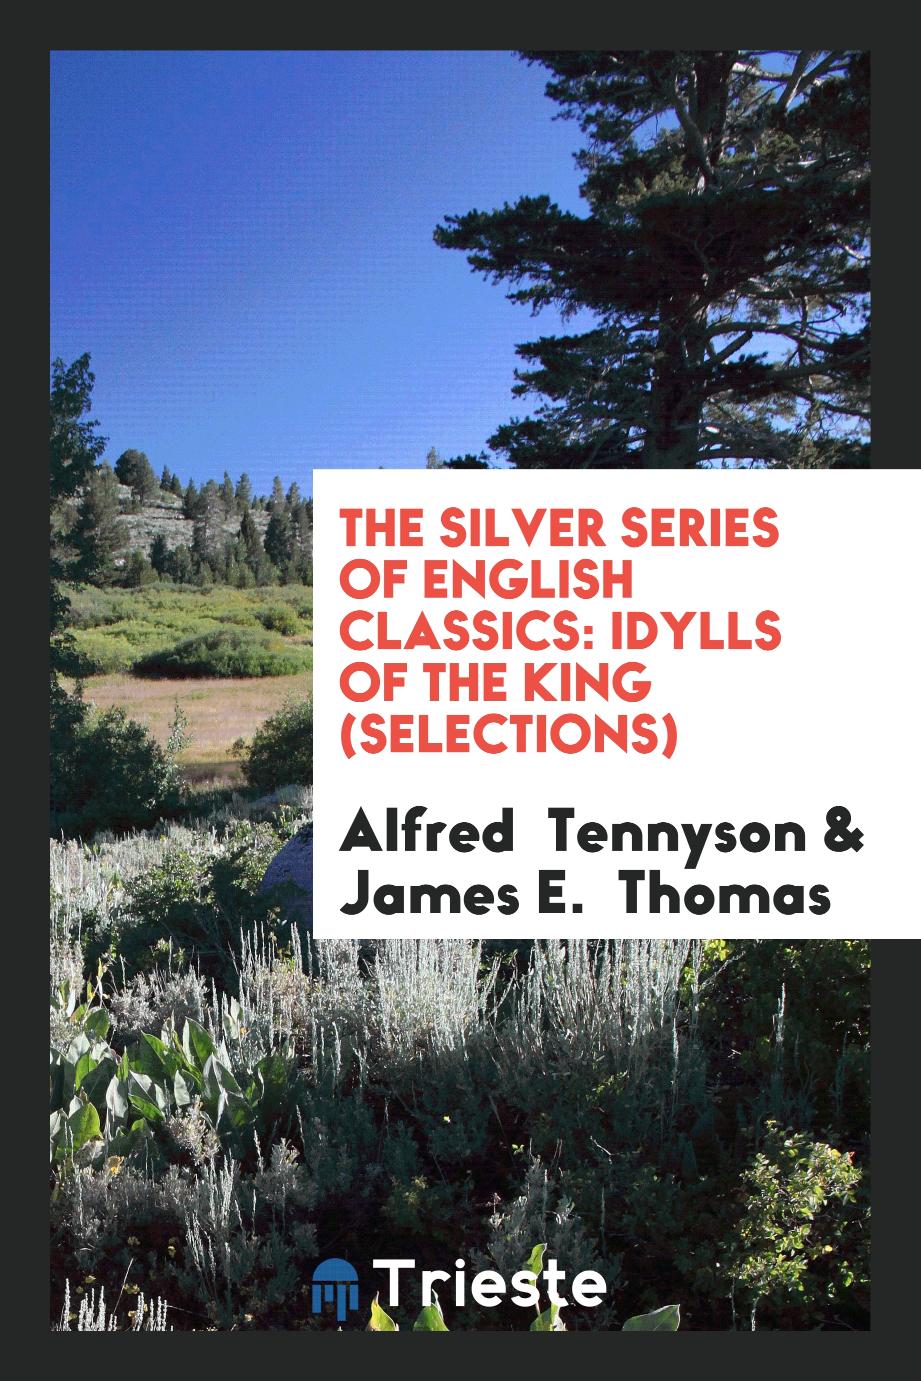 The Silver Series of English Classics: Idylls of the King (Selections)